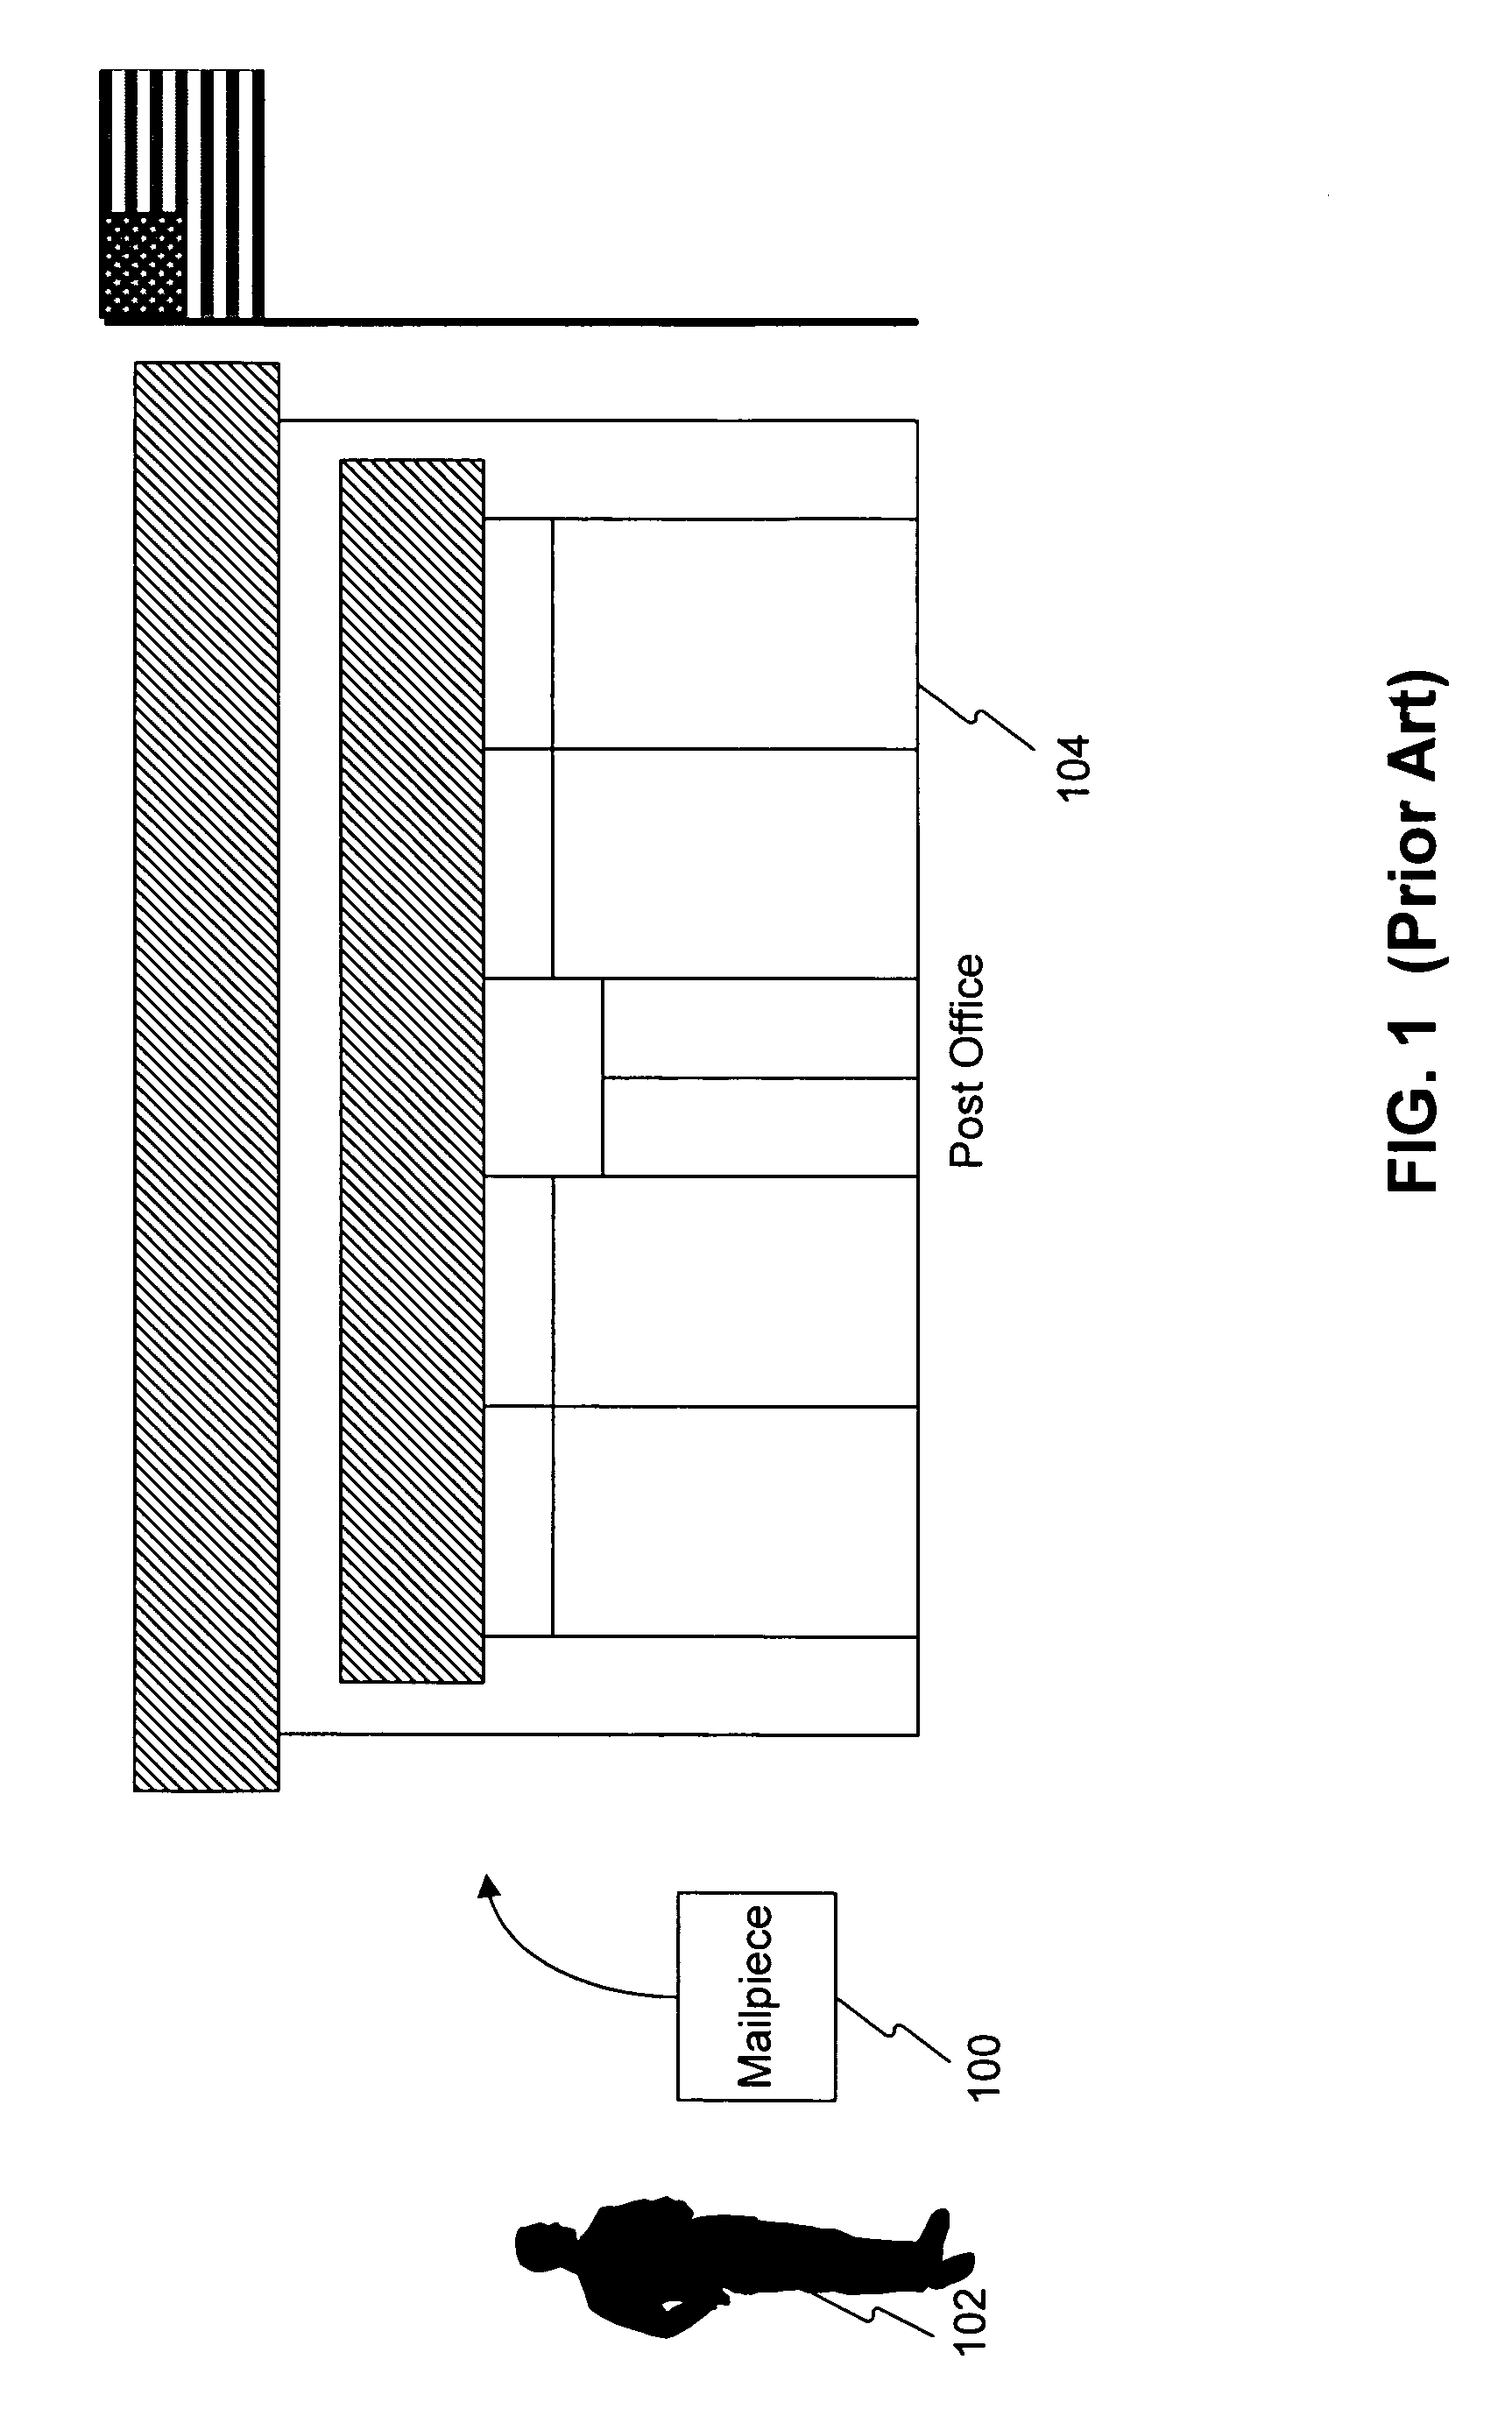 Apparatus and methods for identifying and processing mail using an identification code